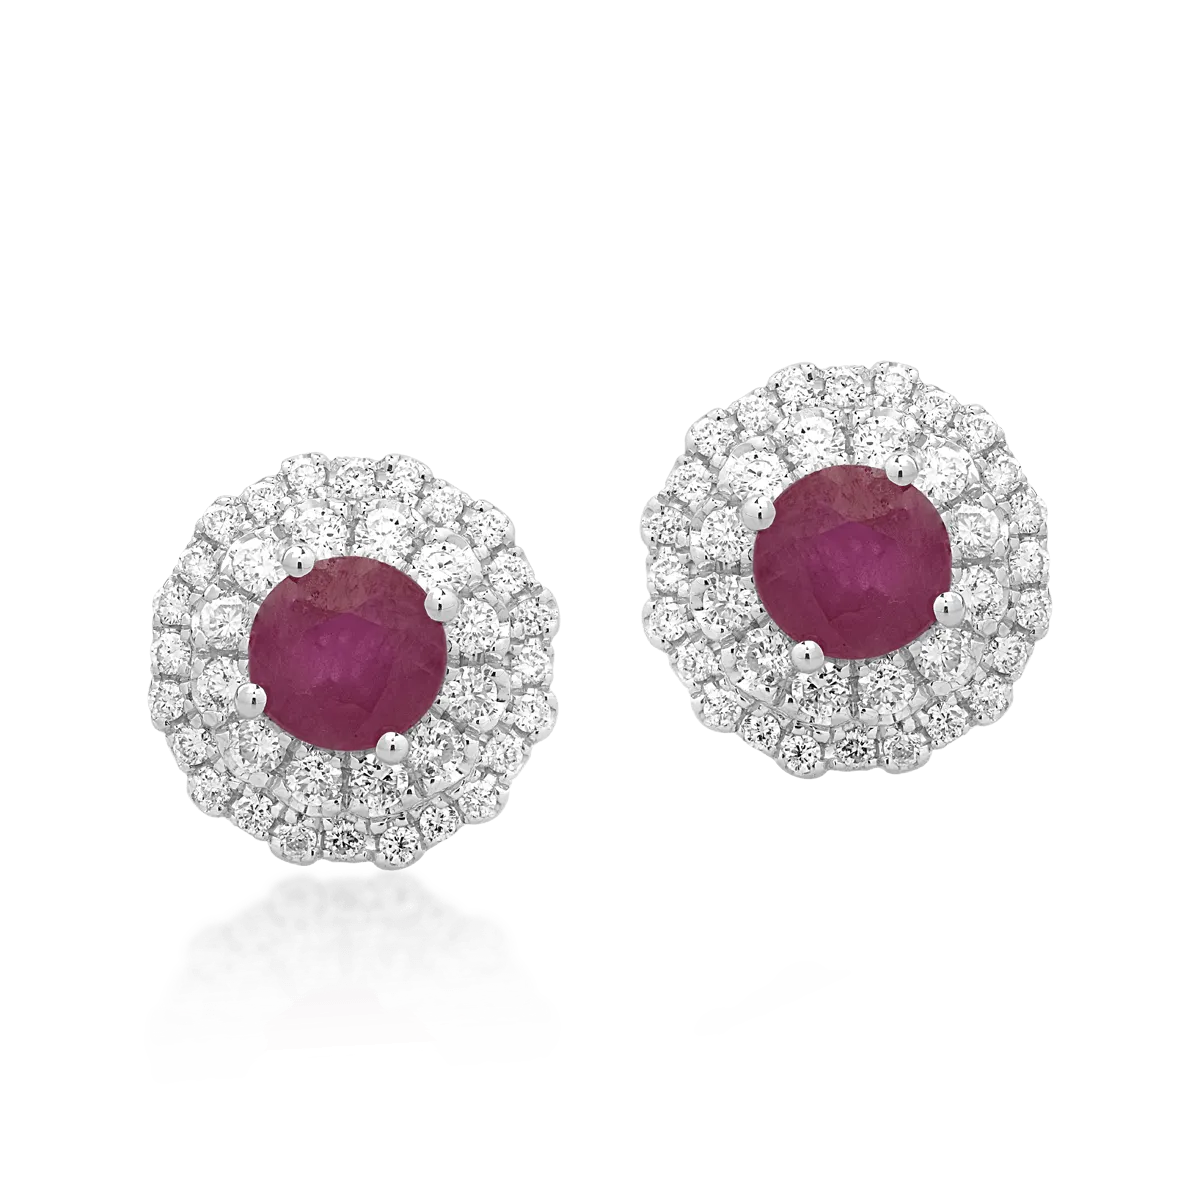 18K white gold earrings with 0.68ct rubies and 0.32ct diamonds